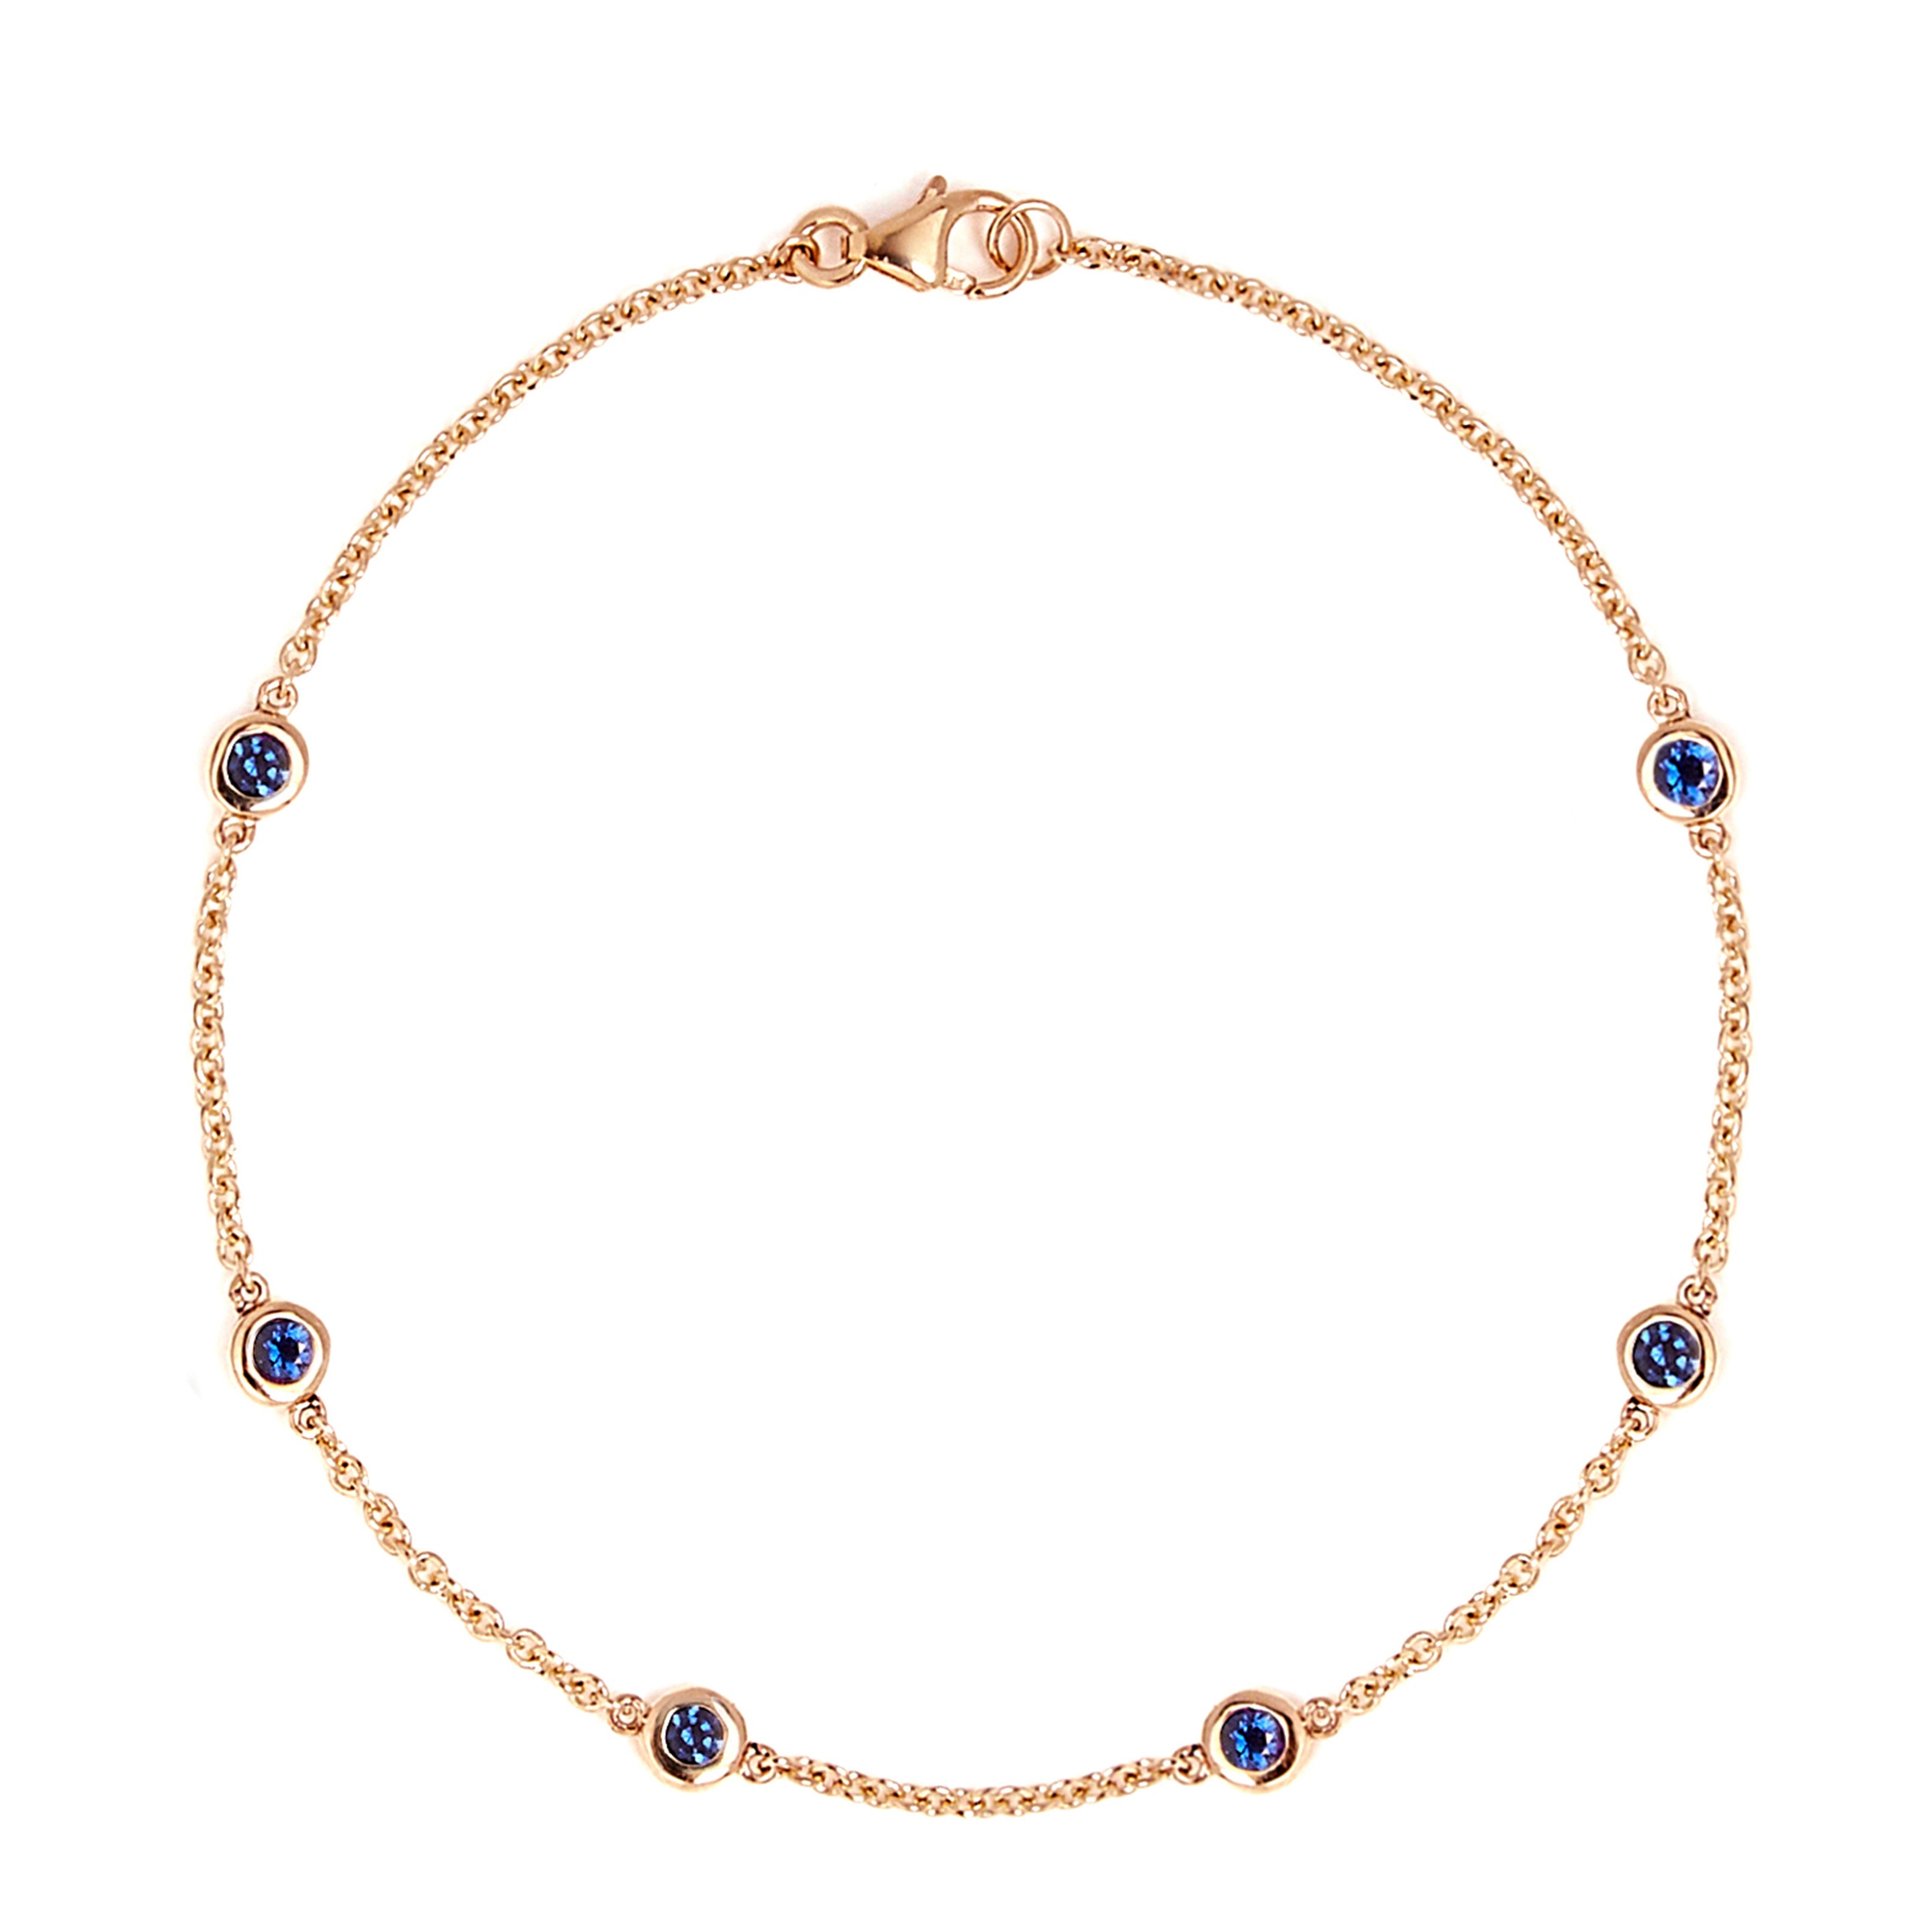 9ct Yellow Gold Chain Bracelet with Spectacle-Set Sapphire